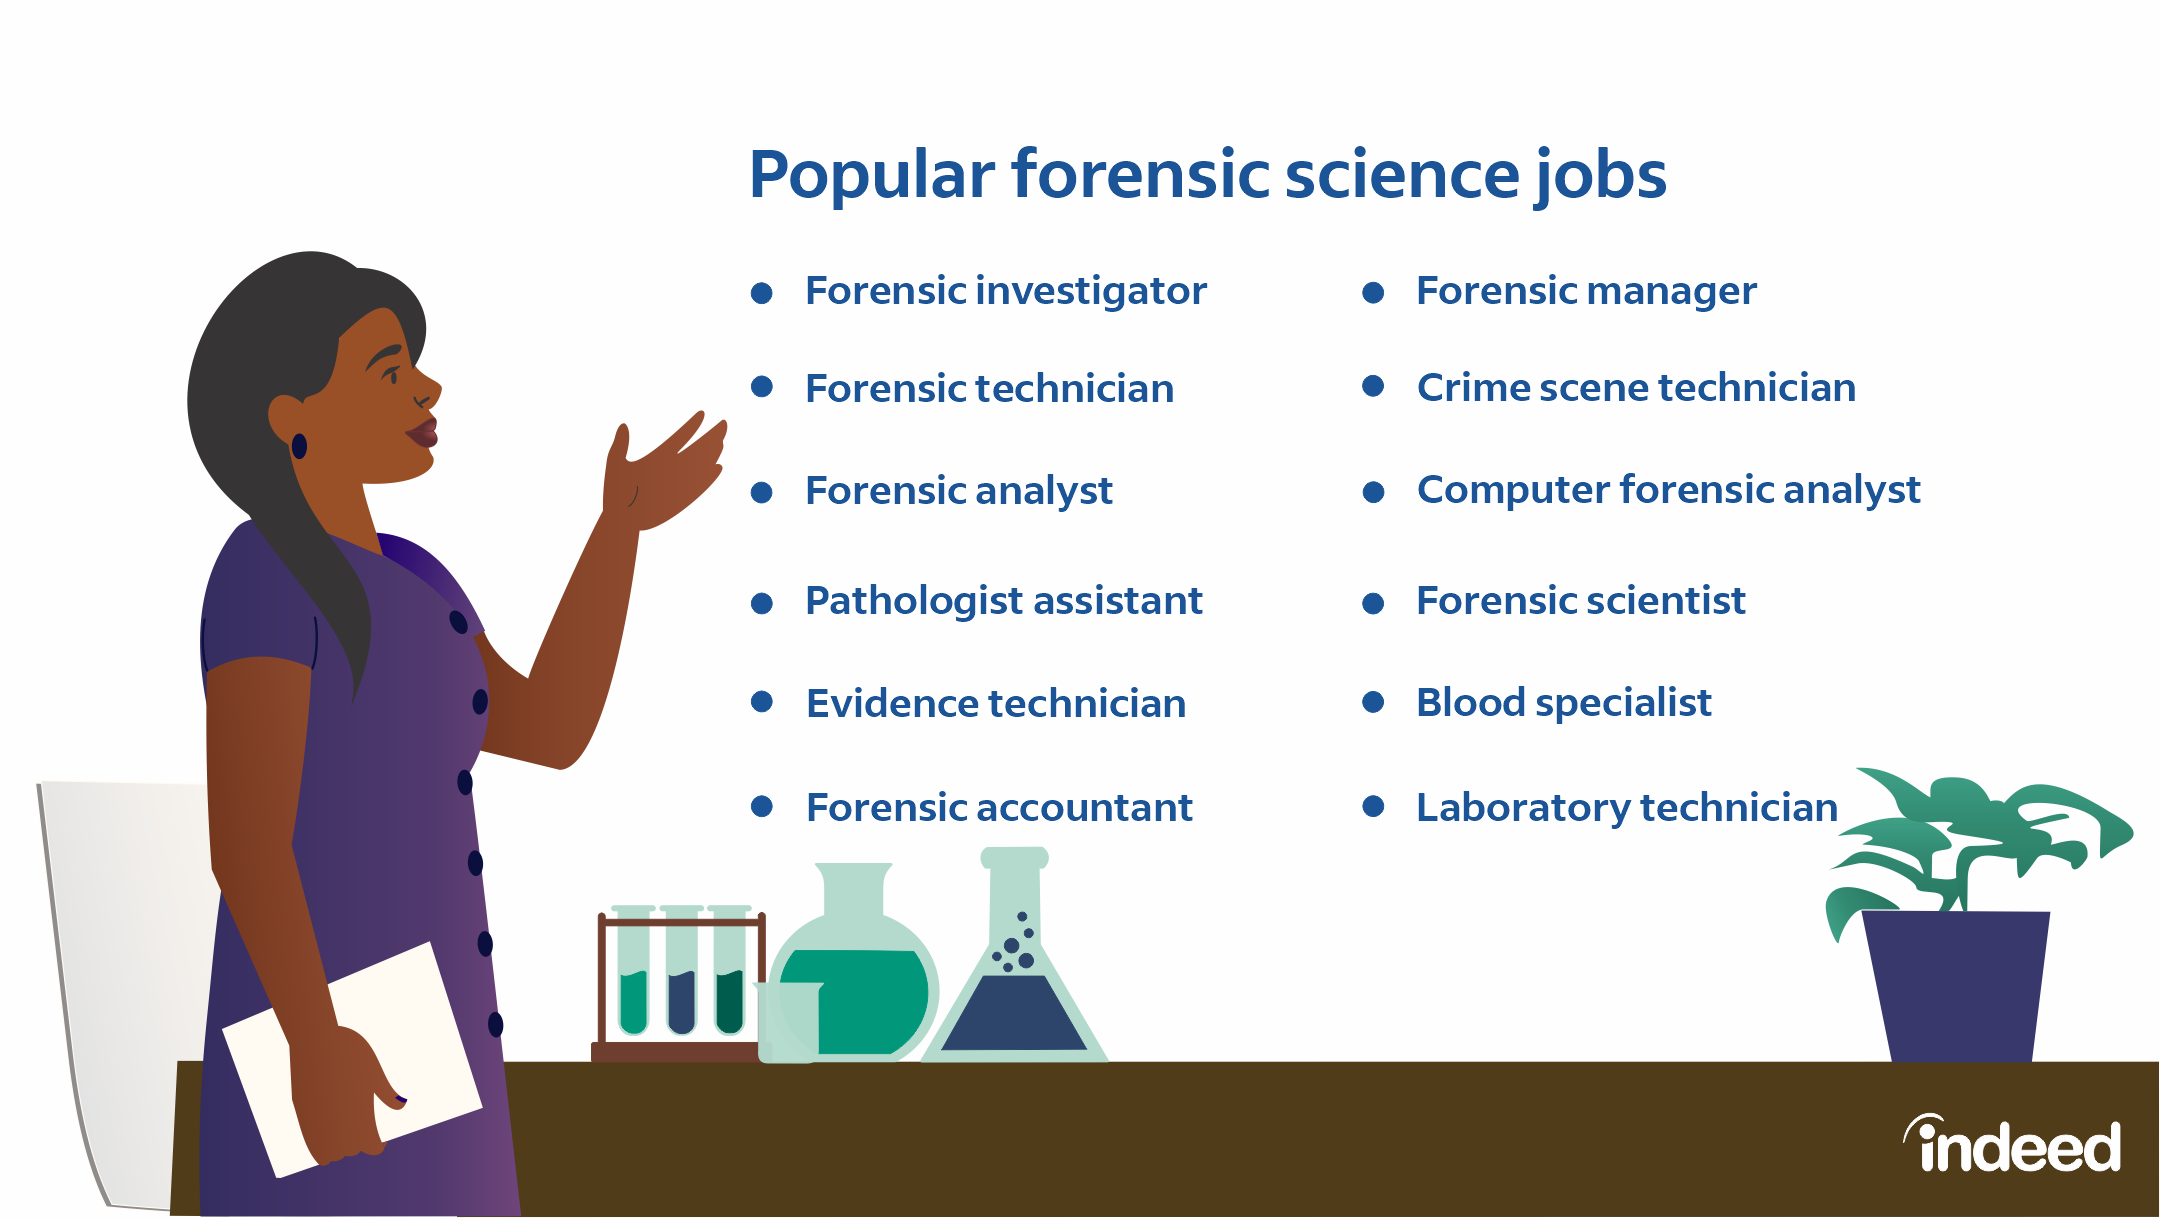 forensic science jobs pay